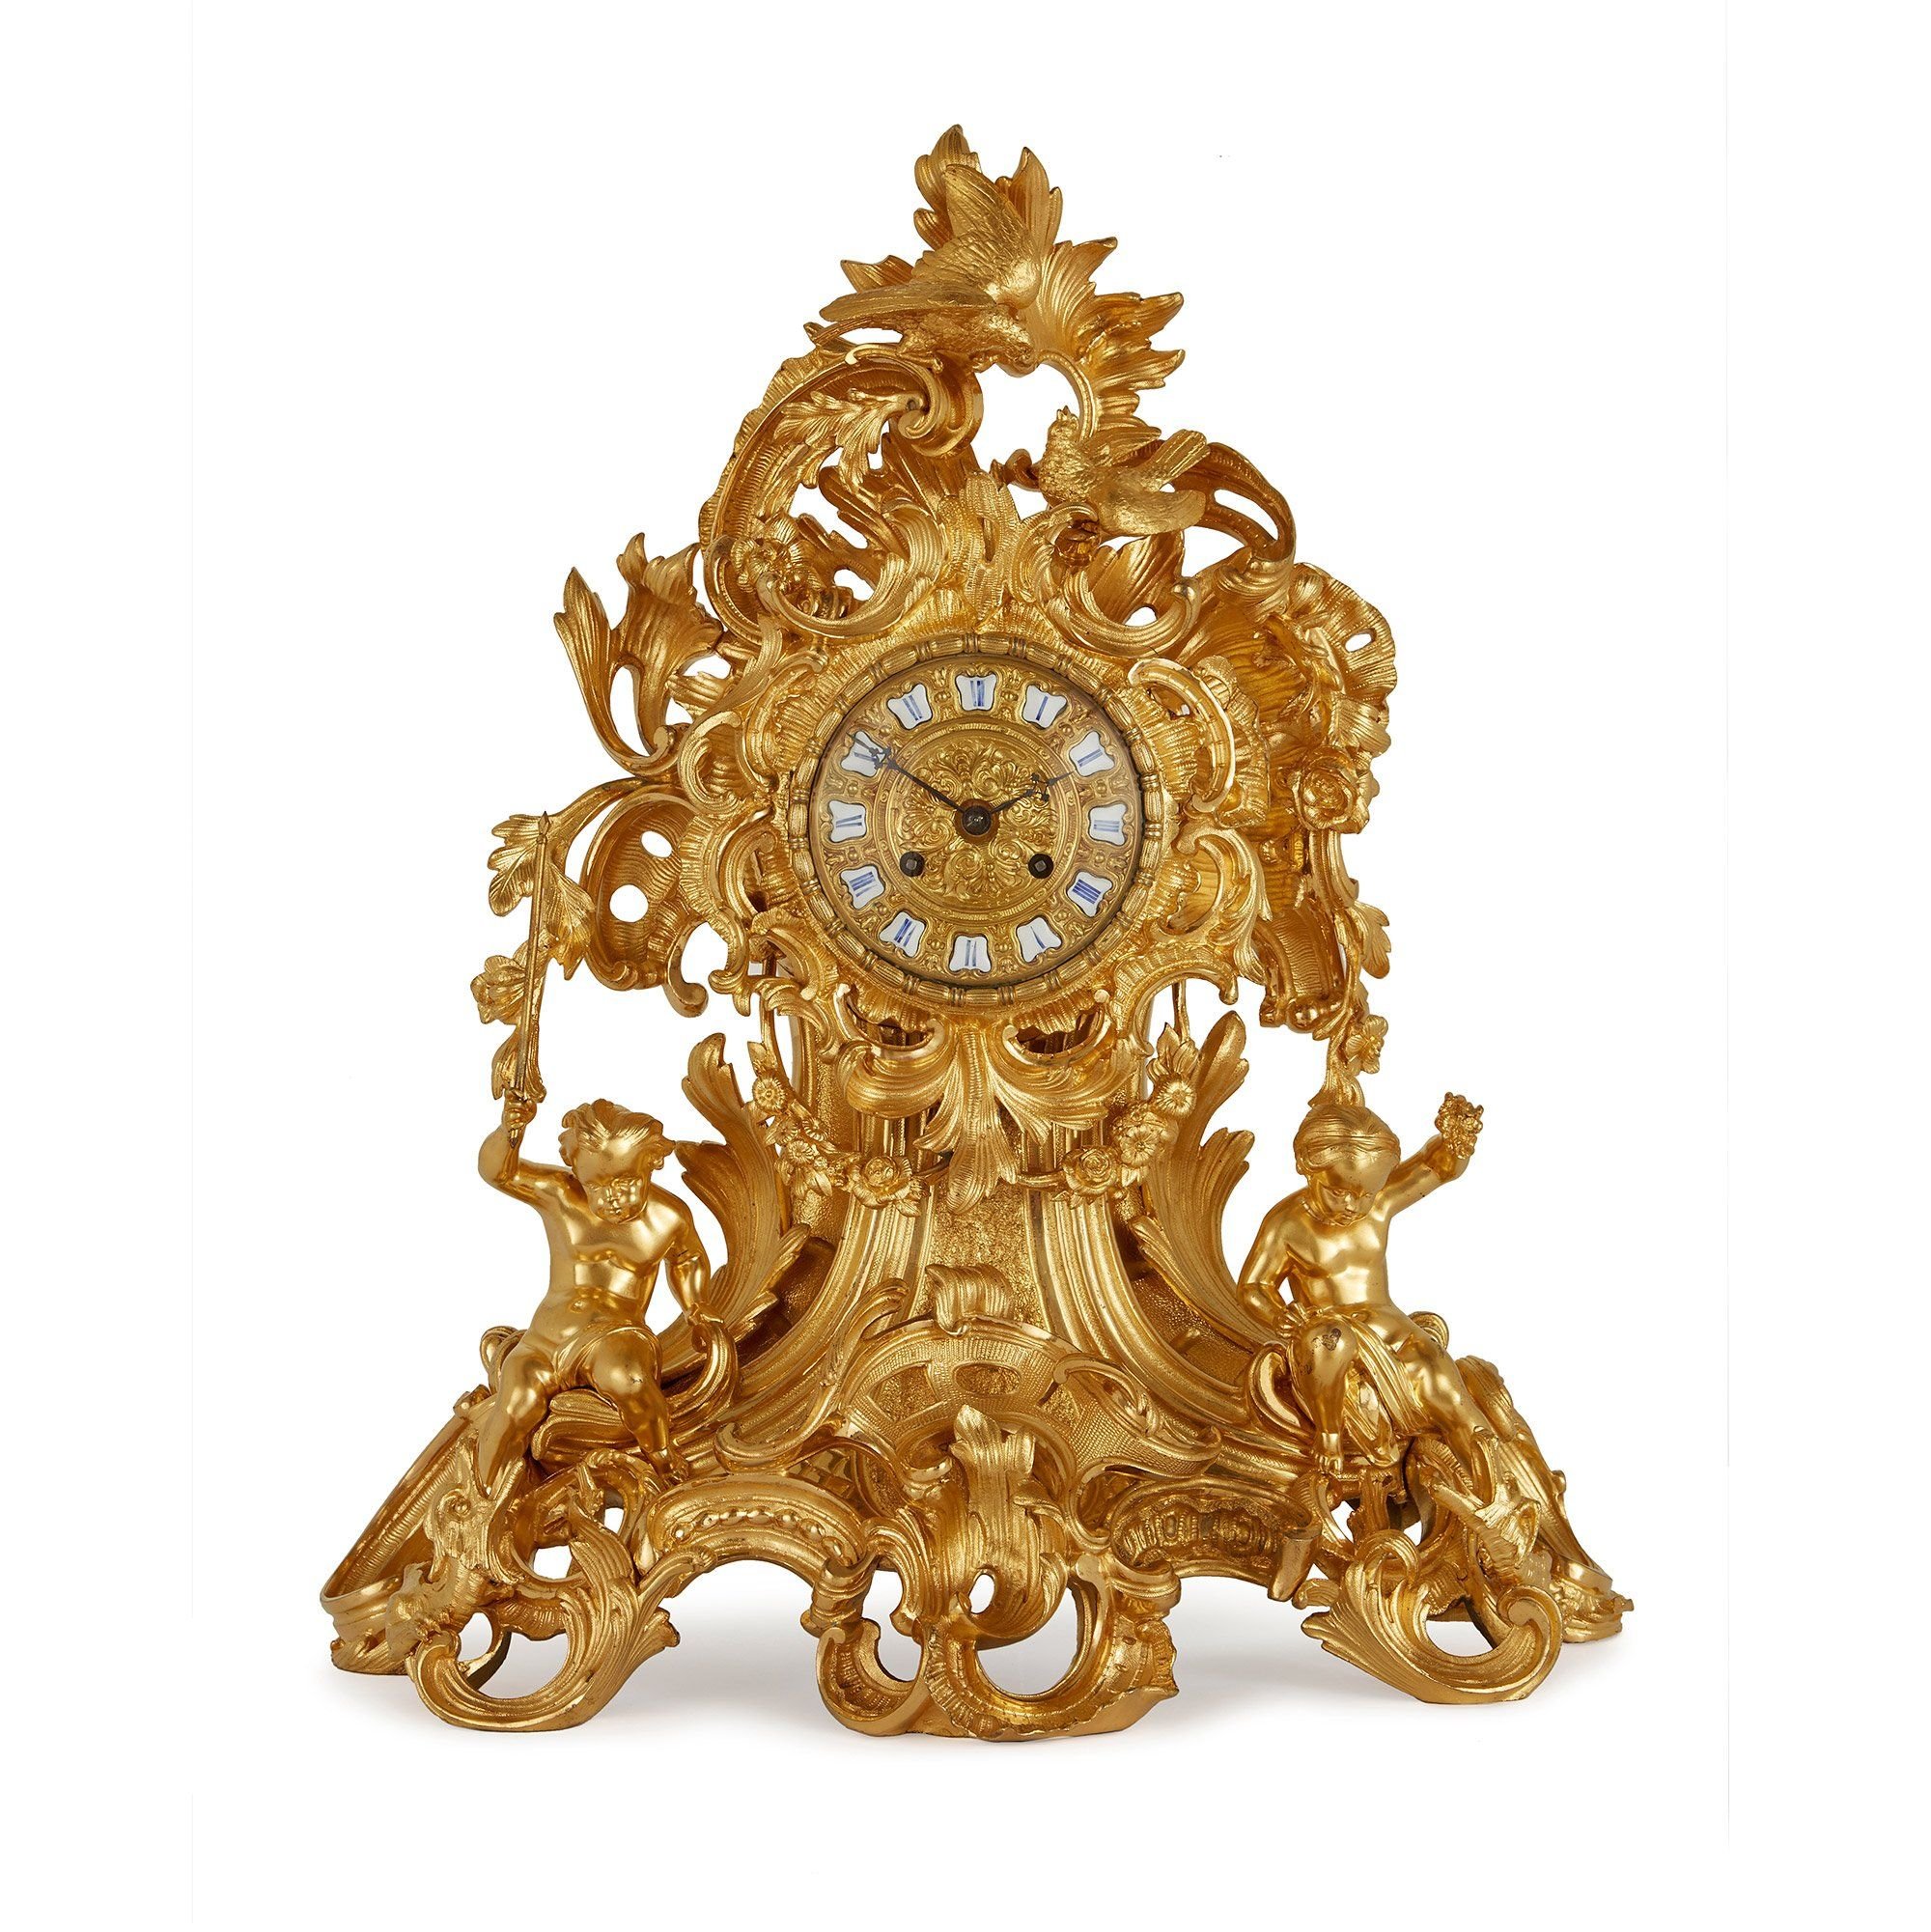 Large French Louis Xv Style Antique Ormolu Mantel Clock Mayfair Gallery The mercury is driven off in a kiln leaving behind a gold coating. gbp